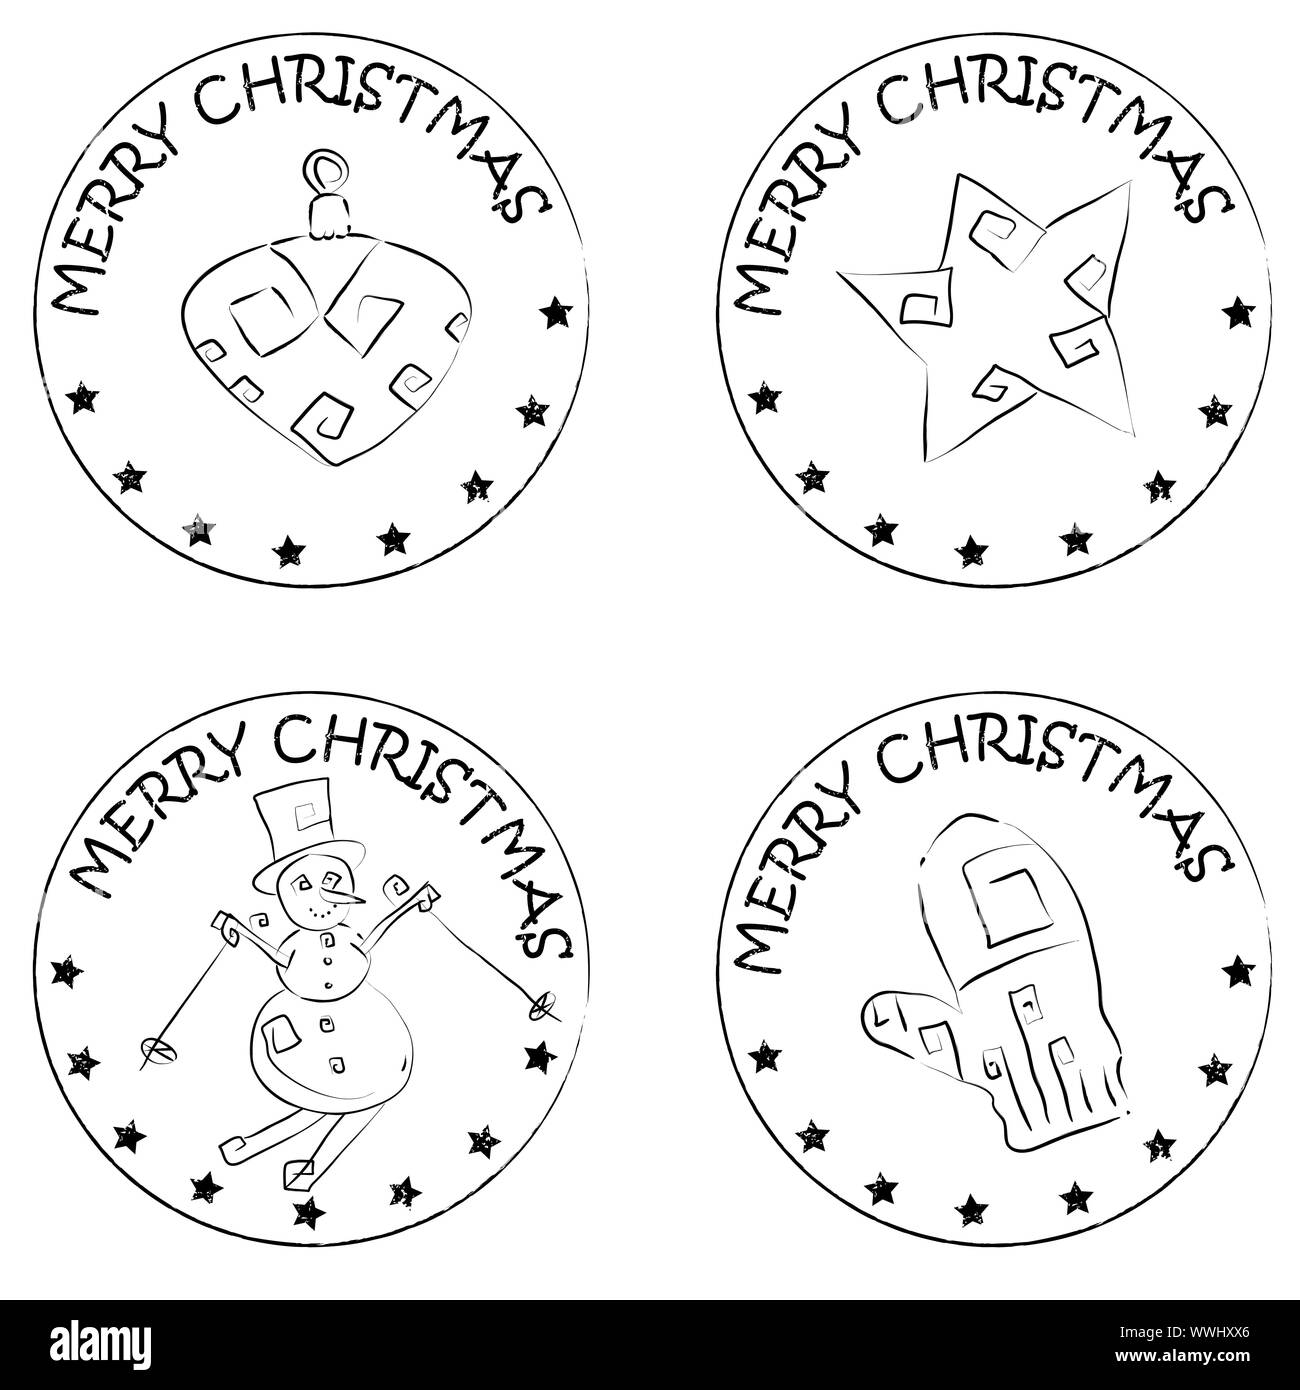 4 christmas coin stamps isolated on white with stars and merry christmas text, snowman, star, glove, globe Stock Photo